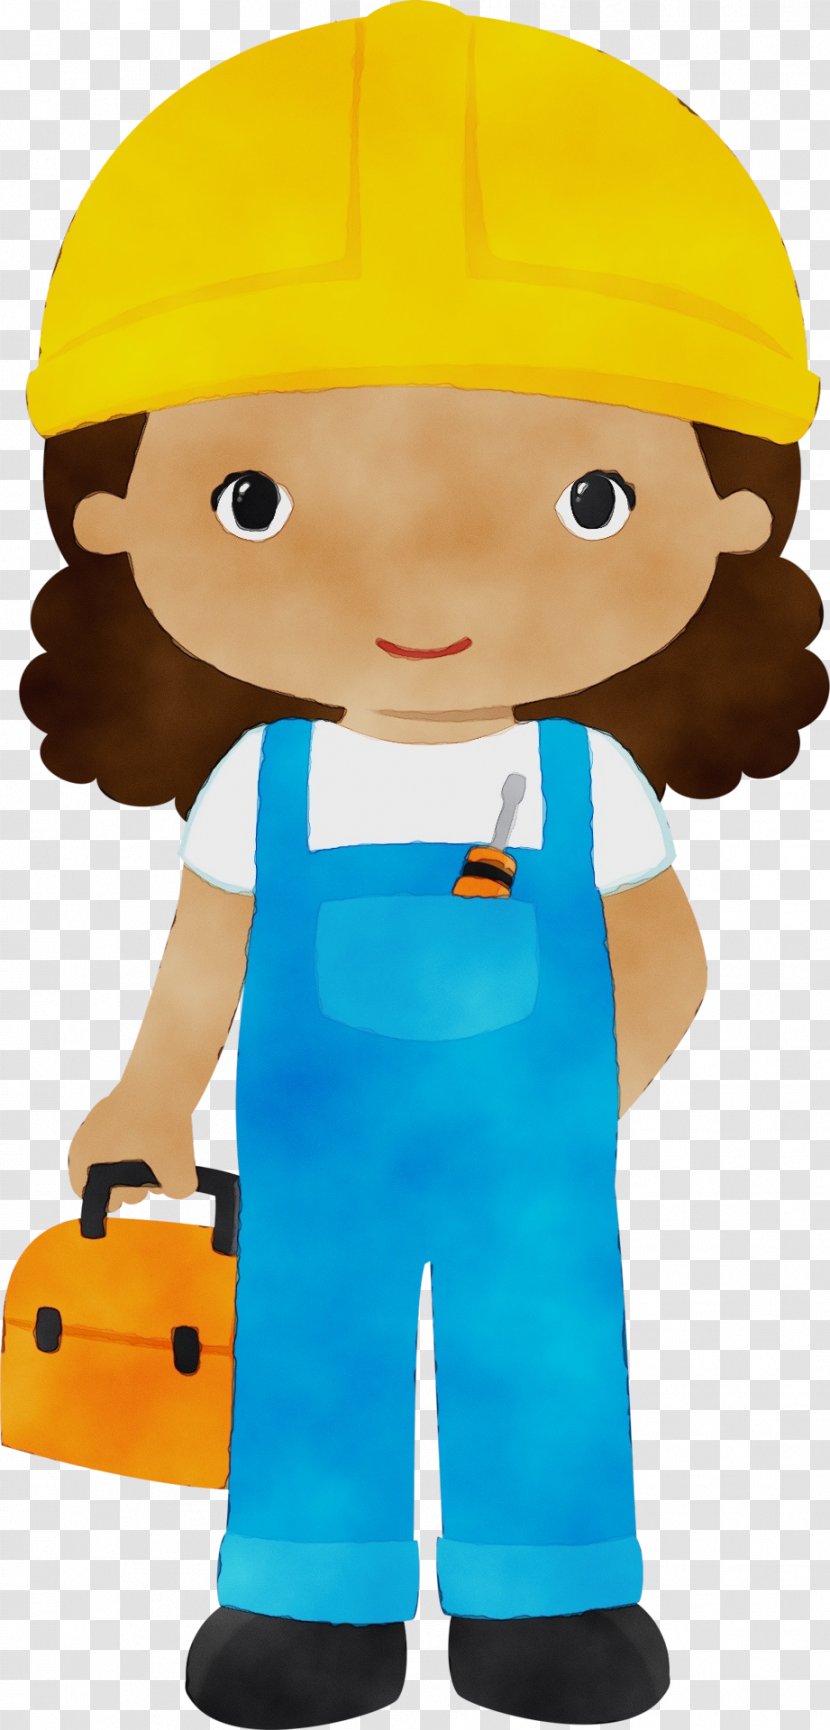 Cartoon Toy Construction Worker Headgear Child - Wet Ink - Play Fictional Character Transparent PNG